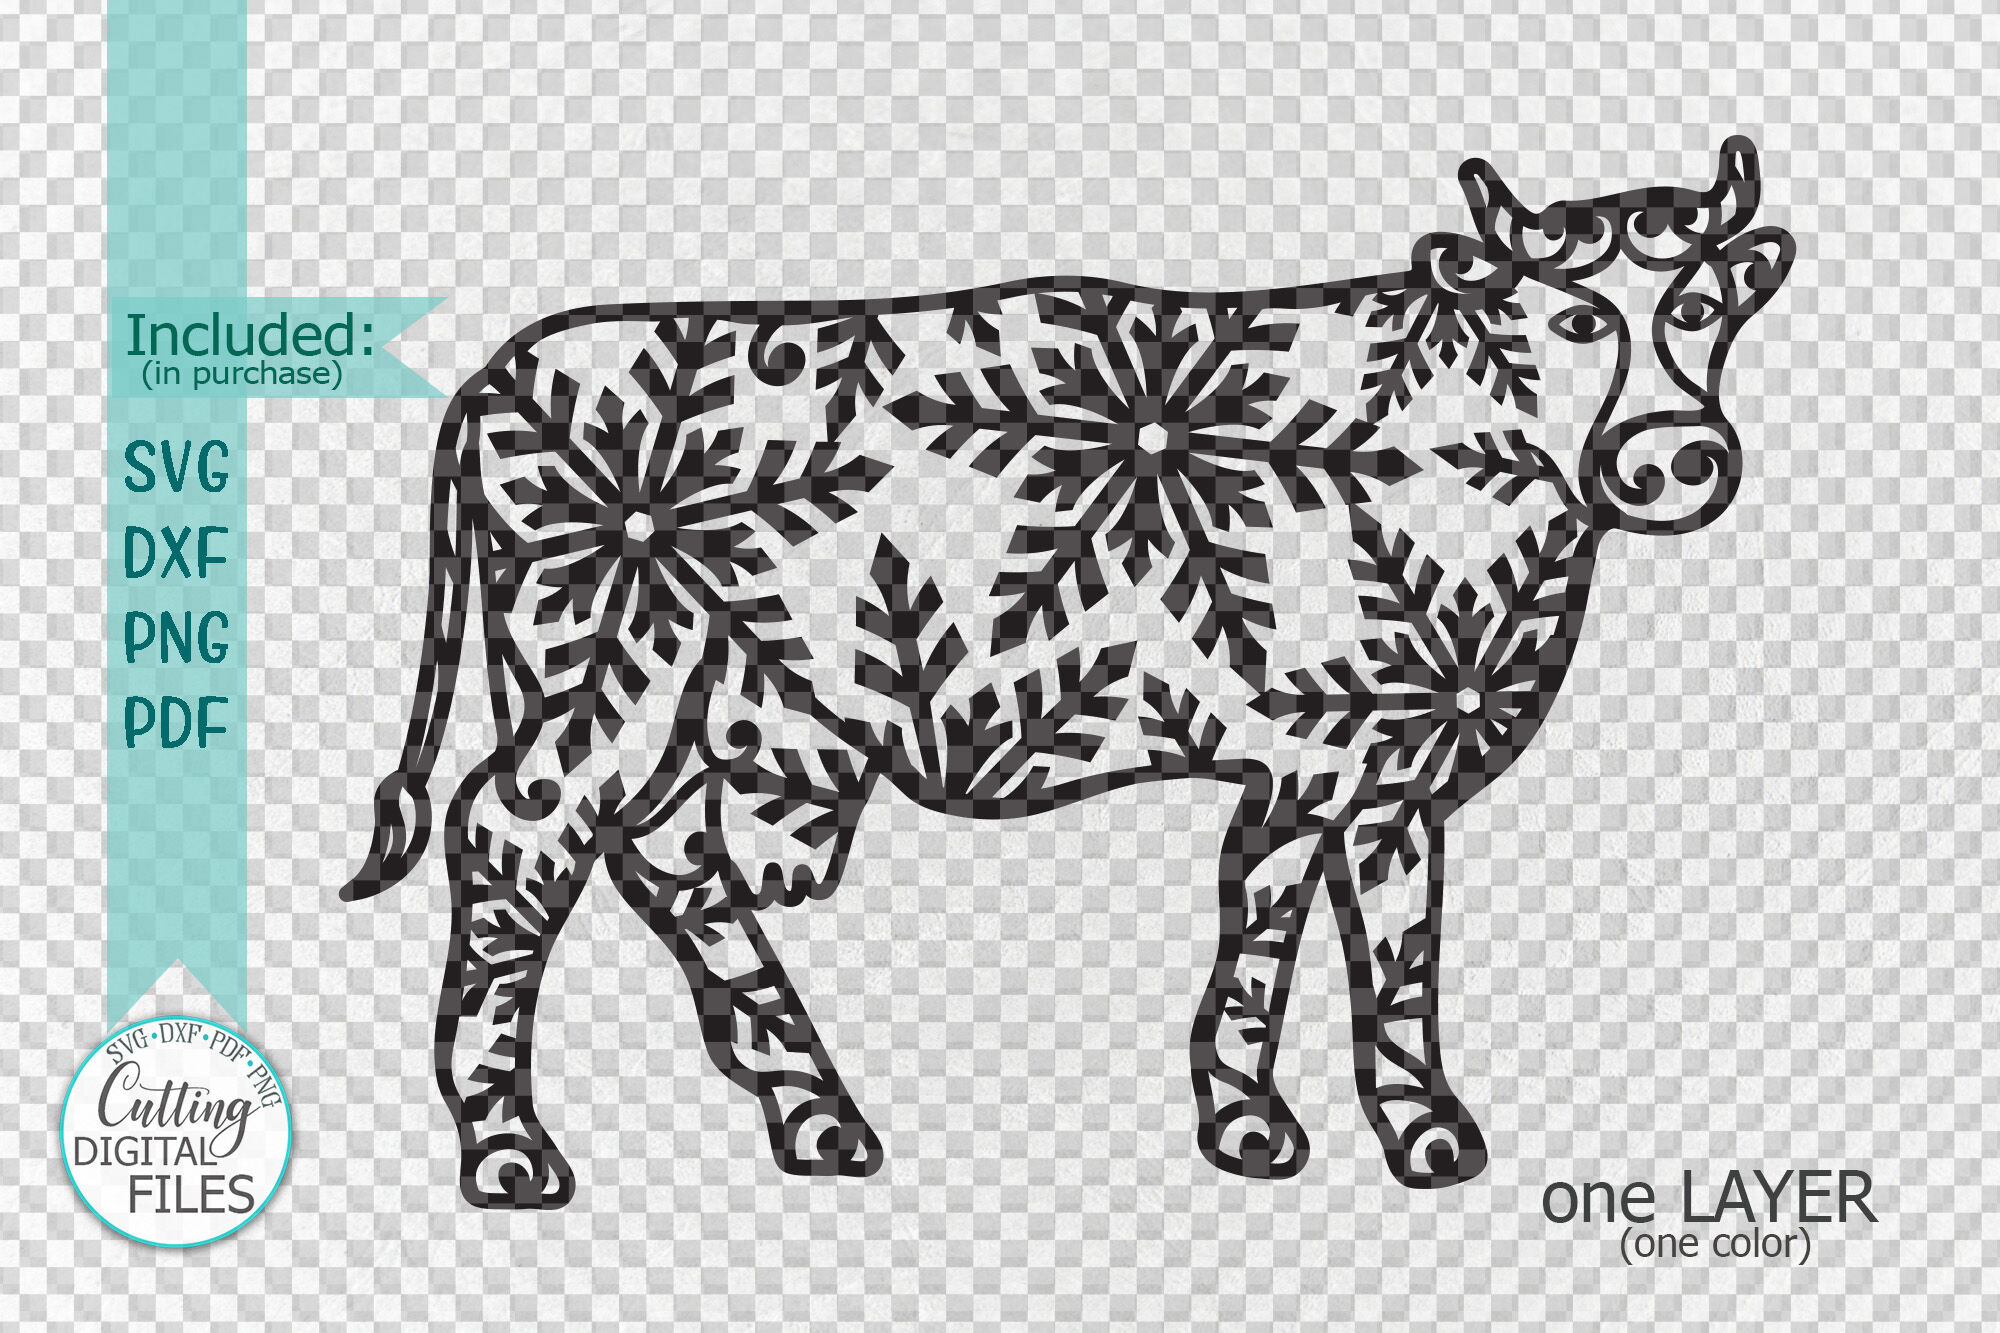 Christmas Cow With Snowflakes Svg Paper Cut Laser Cut File Template By Kartcreation Thehungryjpeg Com